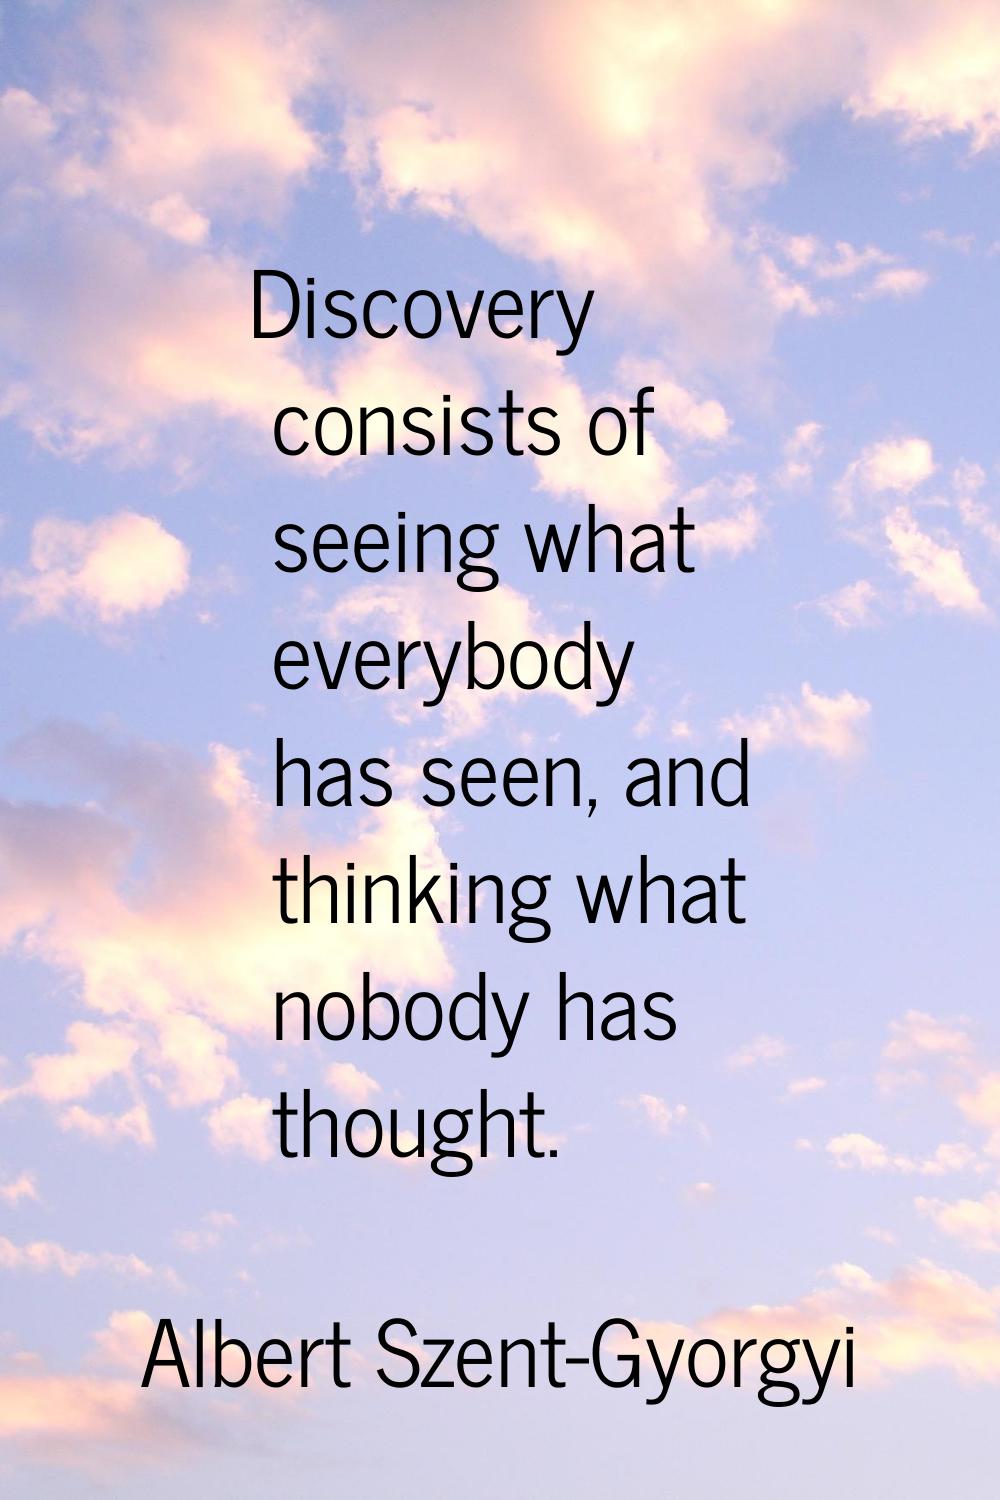 Discovery consists of seeing what everybody has seen, and thinking what nobody has thought.